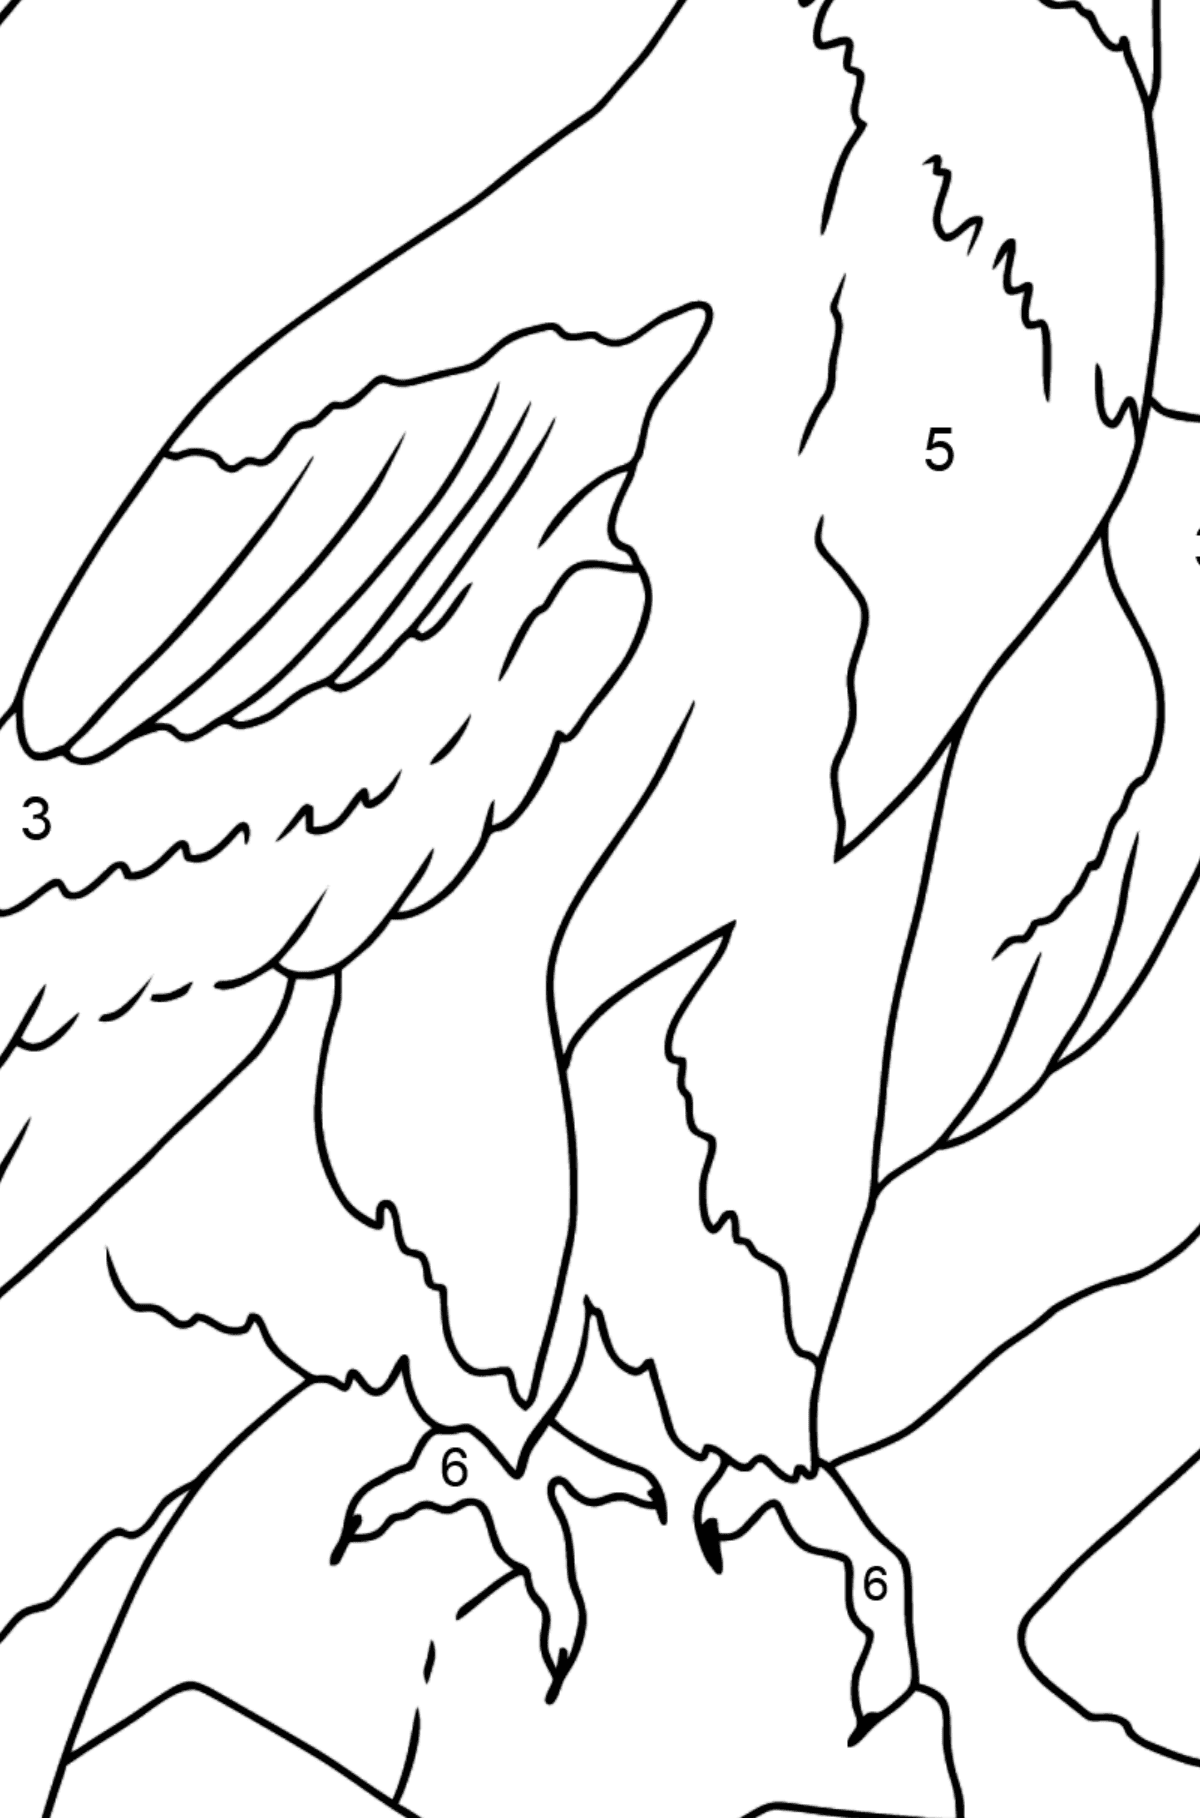 Coloring Page - An Eagle is on the Hunt - Coloring by Numbers for Kids